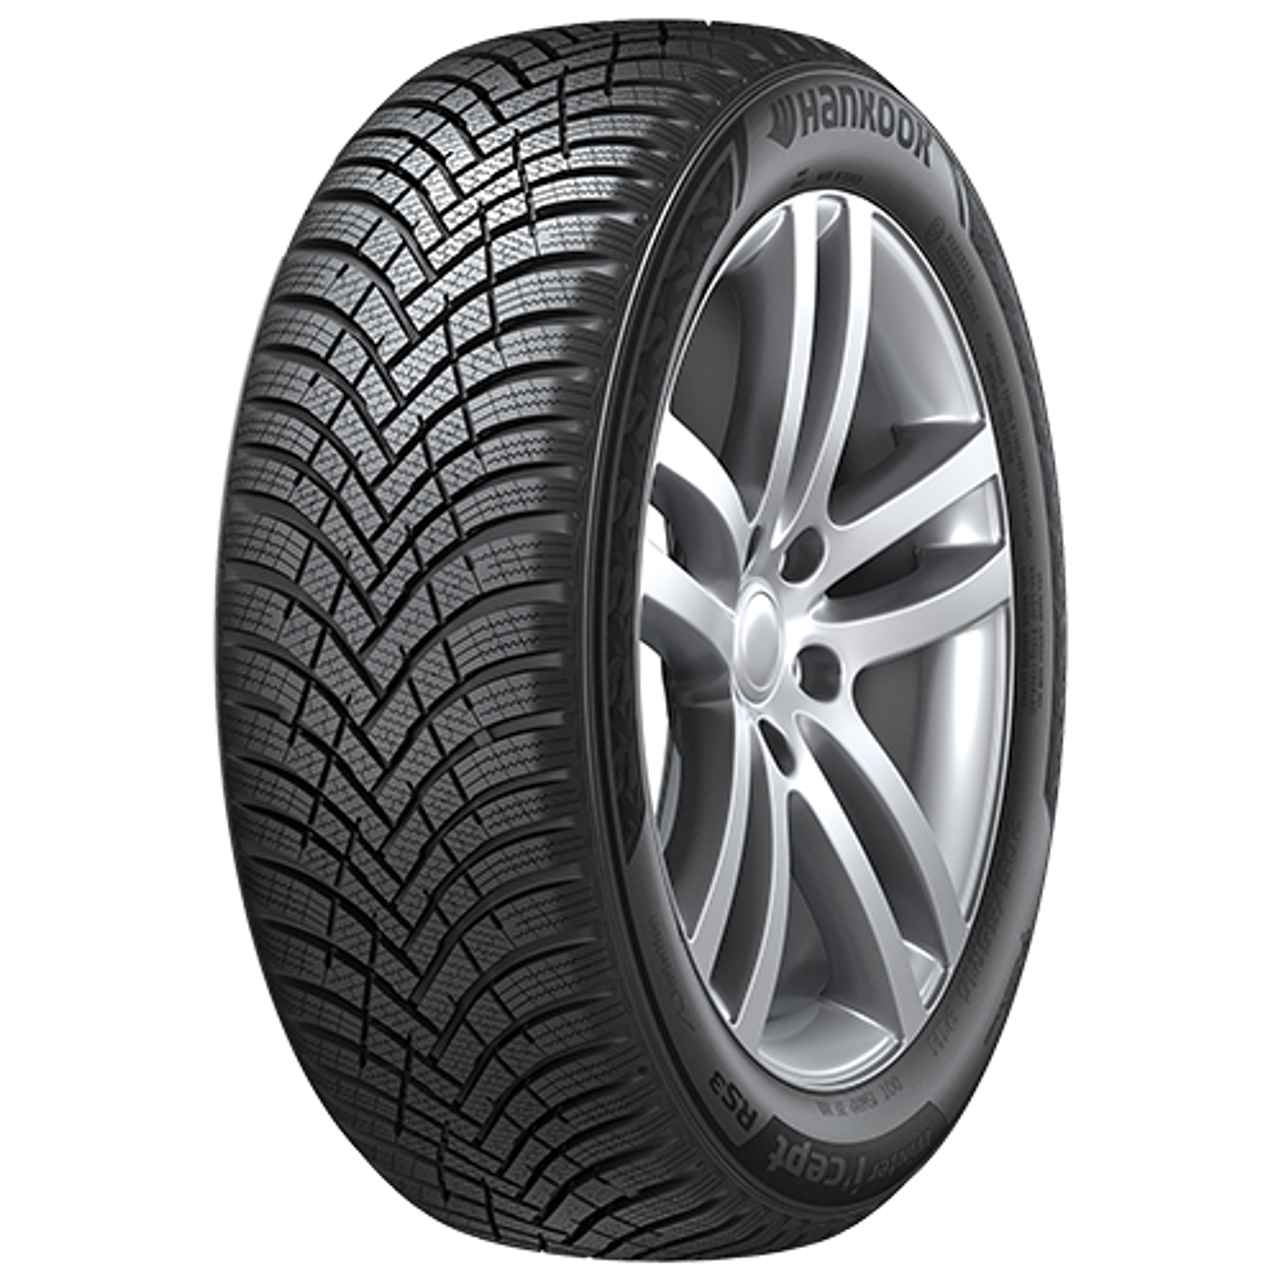 HANKOOK WINTER I*CEPT RS3 165/65R15 81T BSW